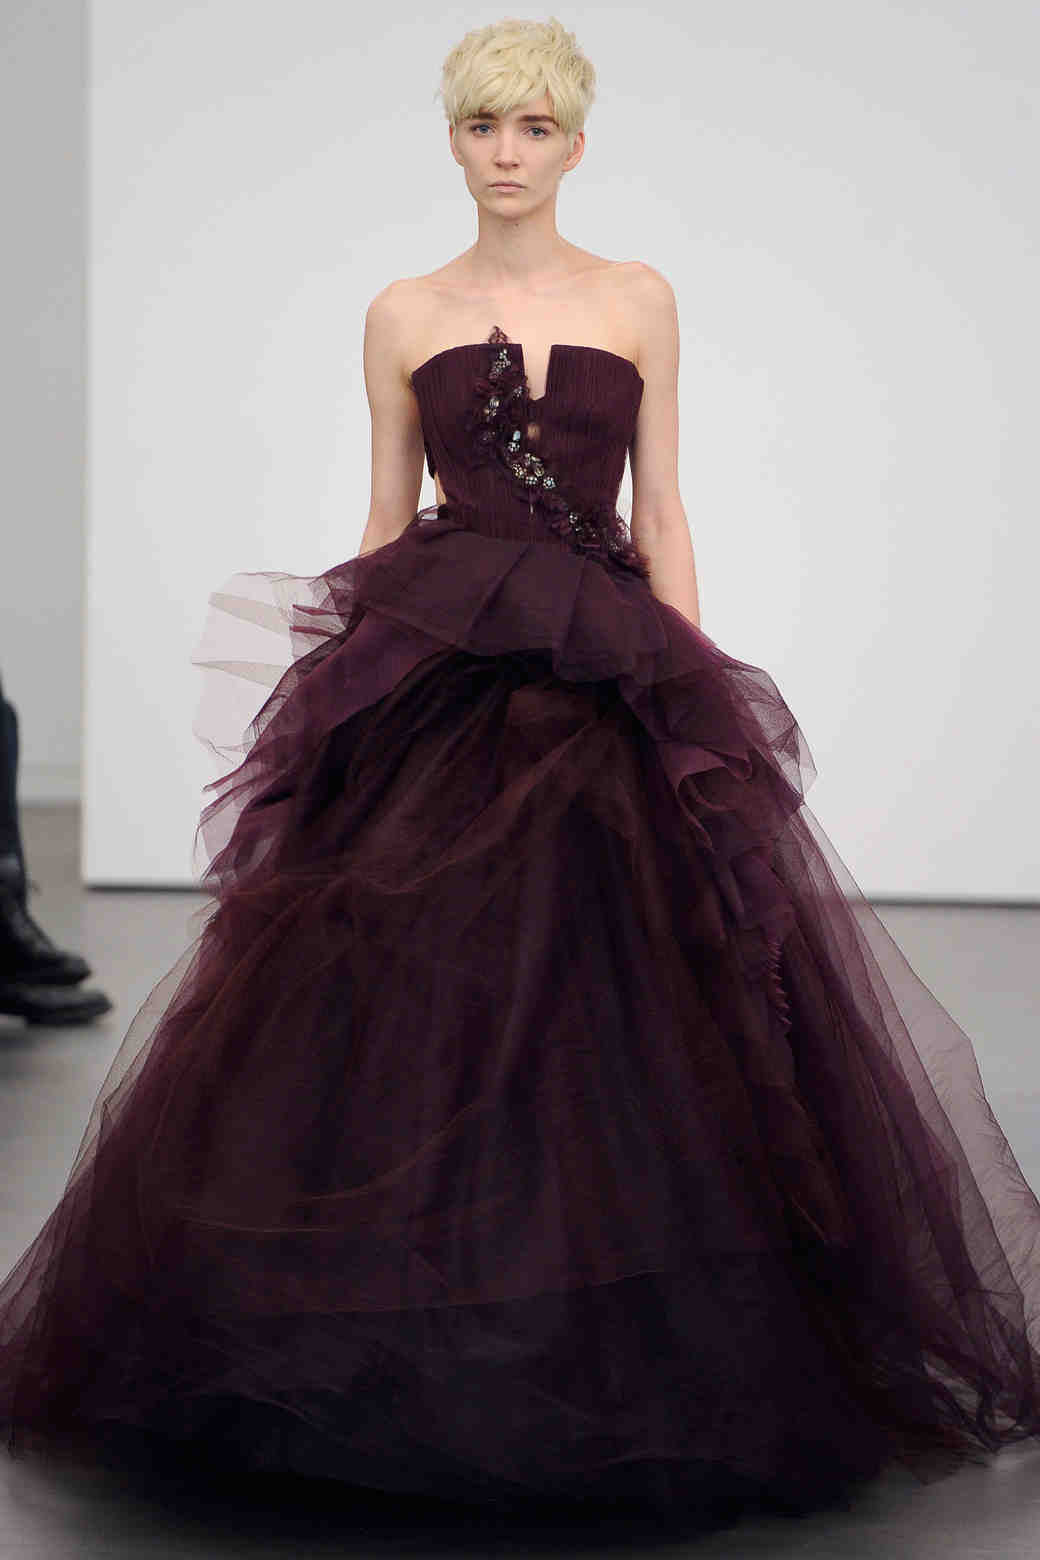 Chrissy Teigen's Three Vera Wang Gowns: From Sketch To ...